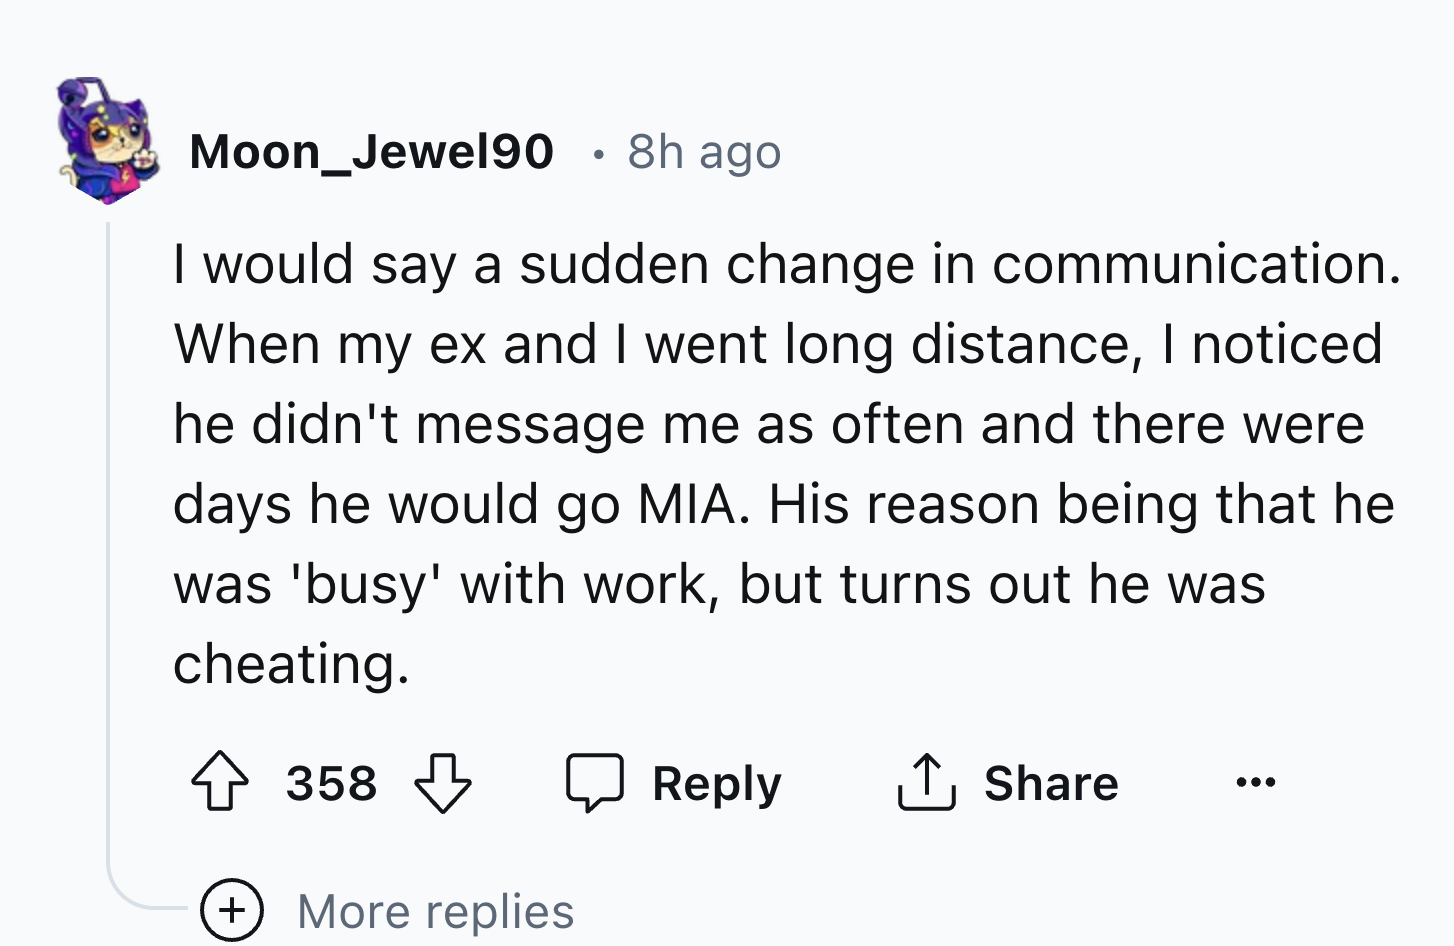 number - Moon_Jewel90 8h ago I would say a sudden change in communication. When my ex and I went long distance, I noticed he didn't message me as often and there were days he would go Mia. His reason being that he was 'busy' with work, but turns out he wa